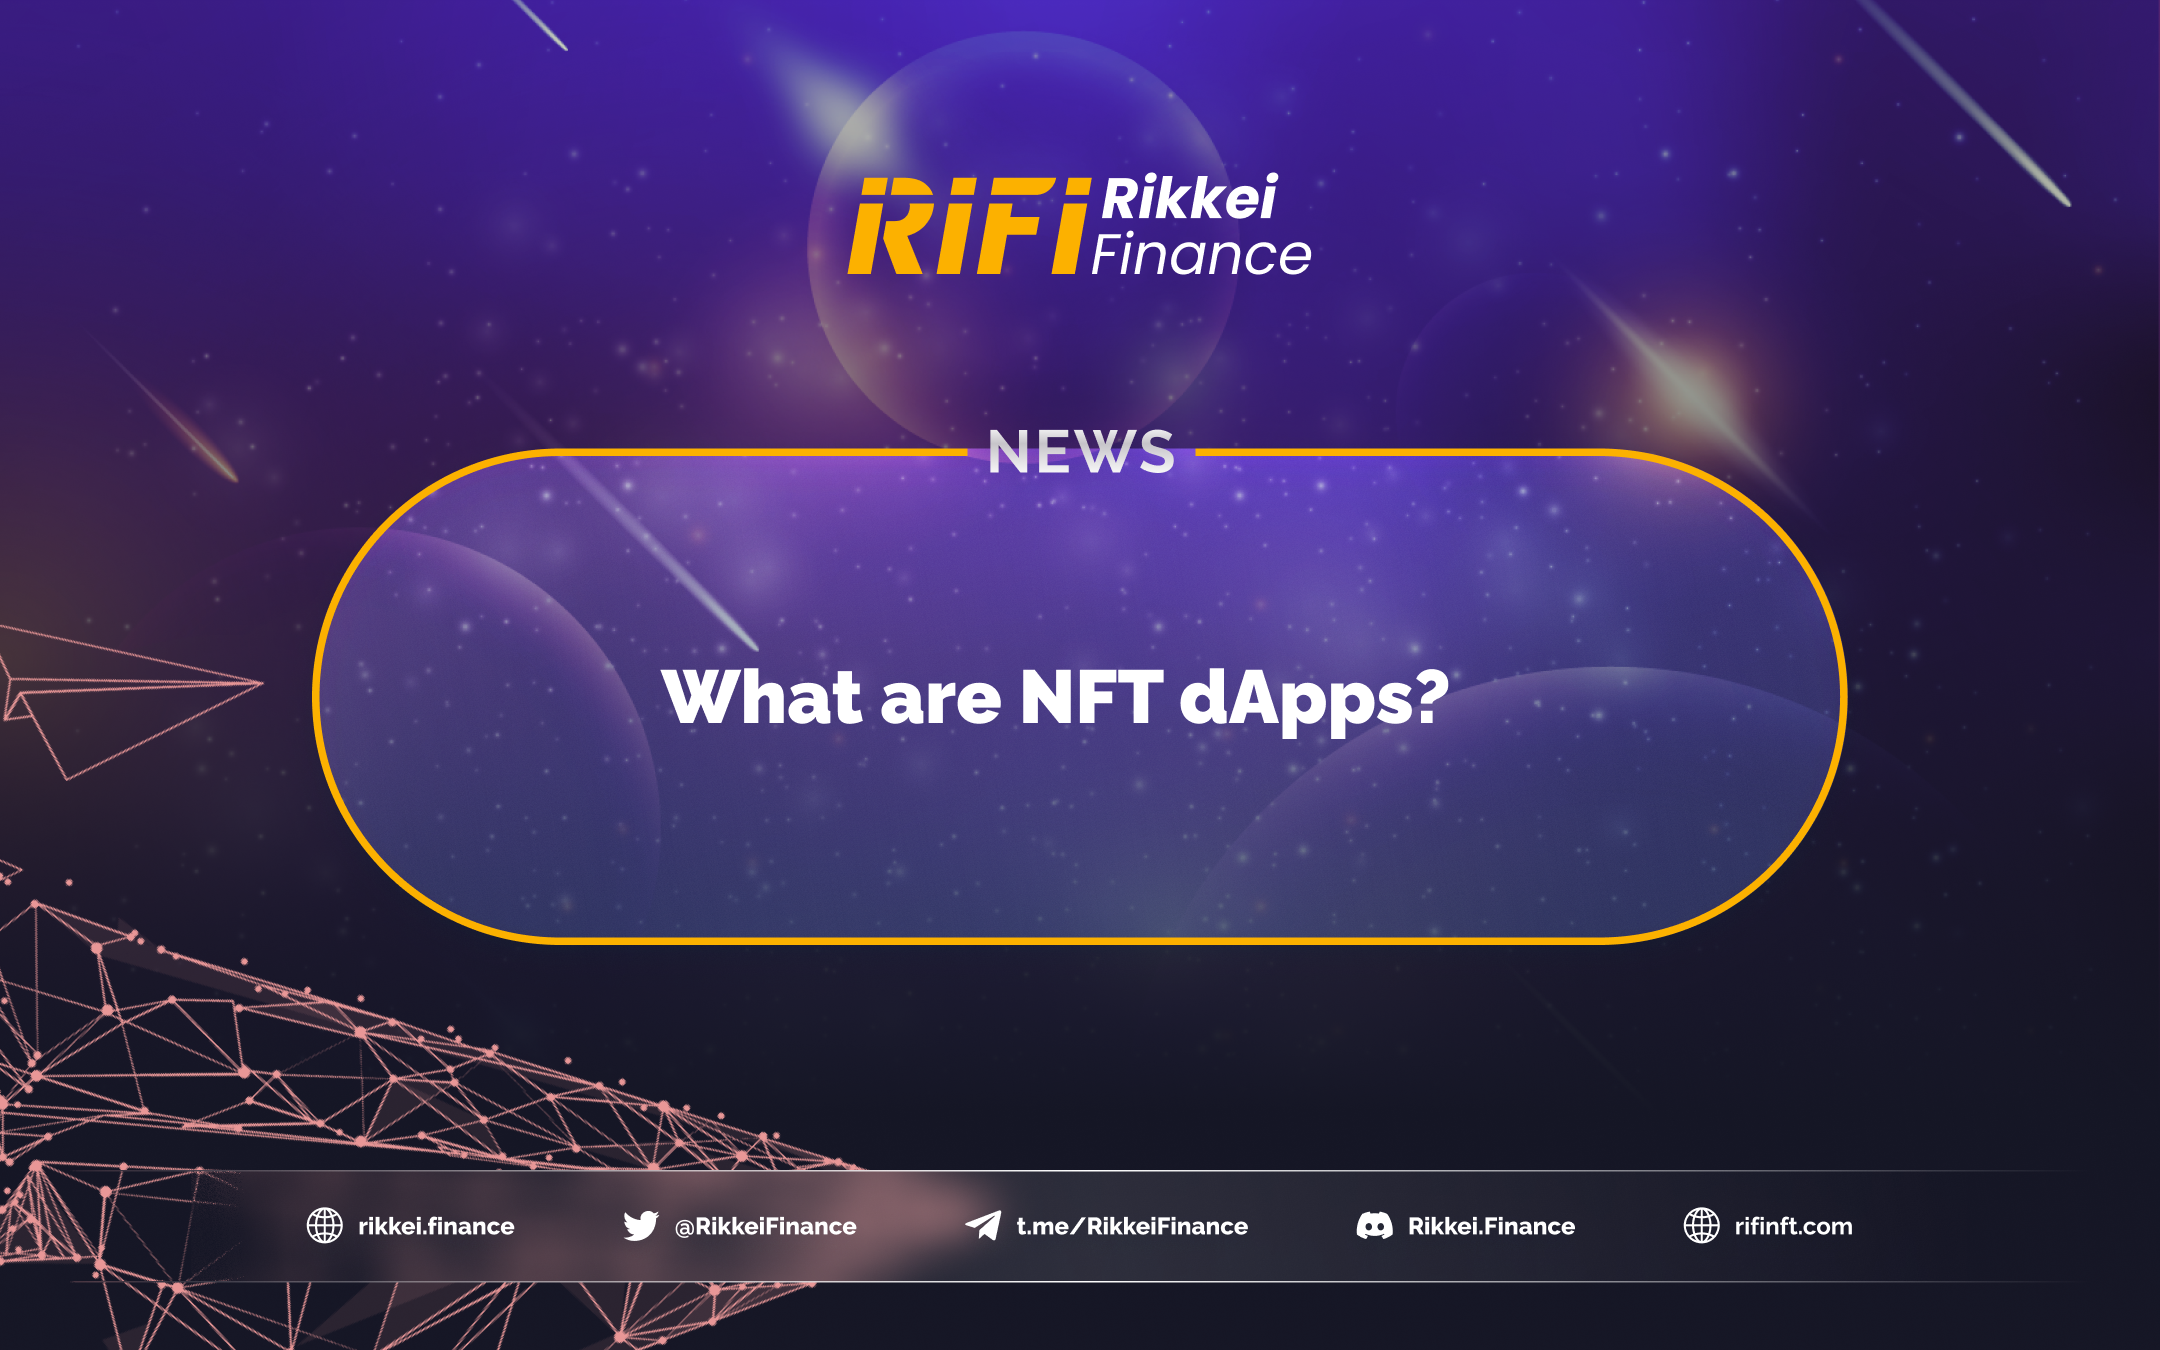 What are NFT dApps? What are benefits and drawbacks of NFT dApps?